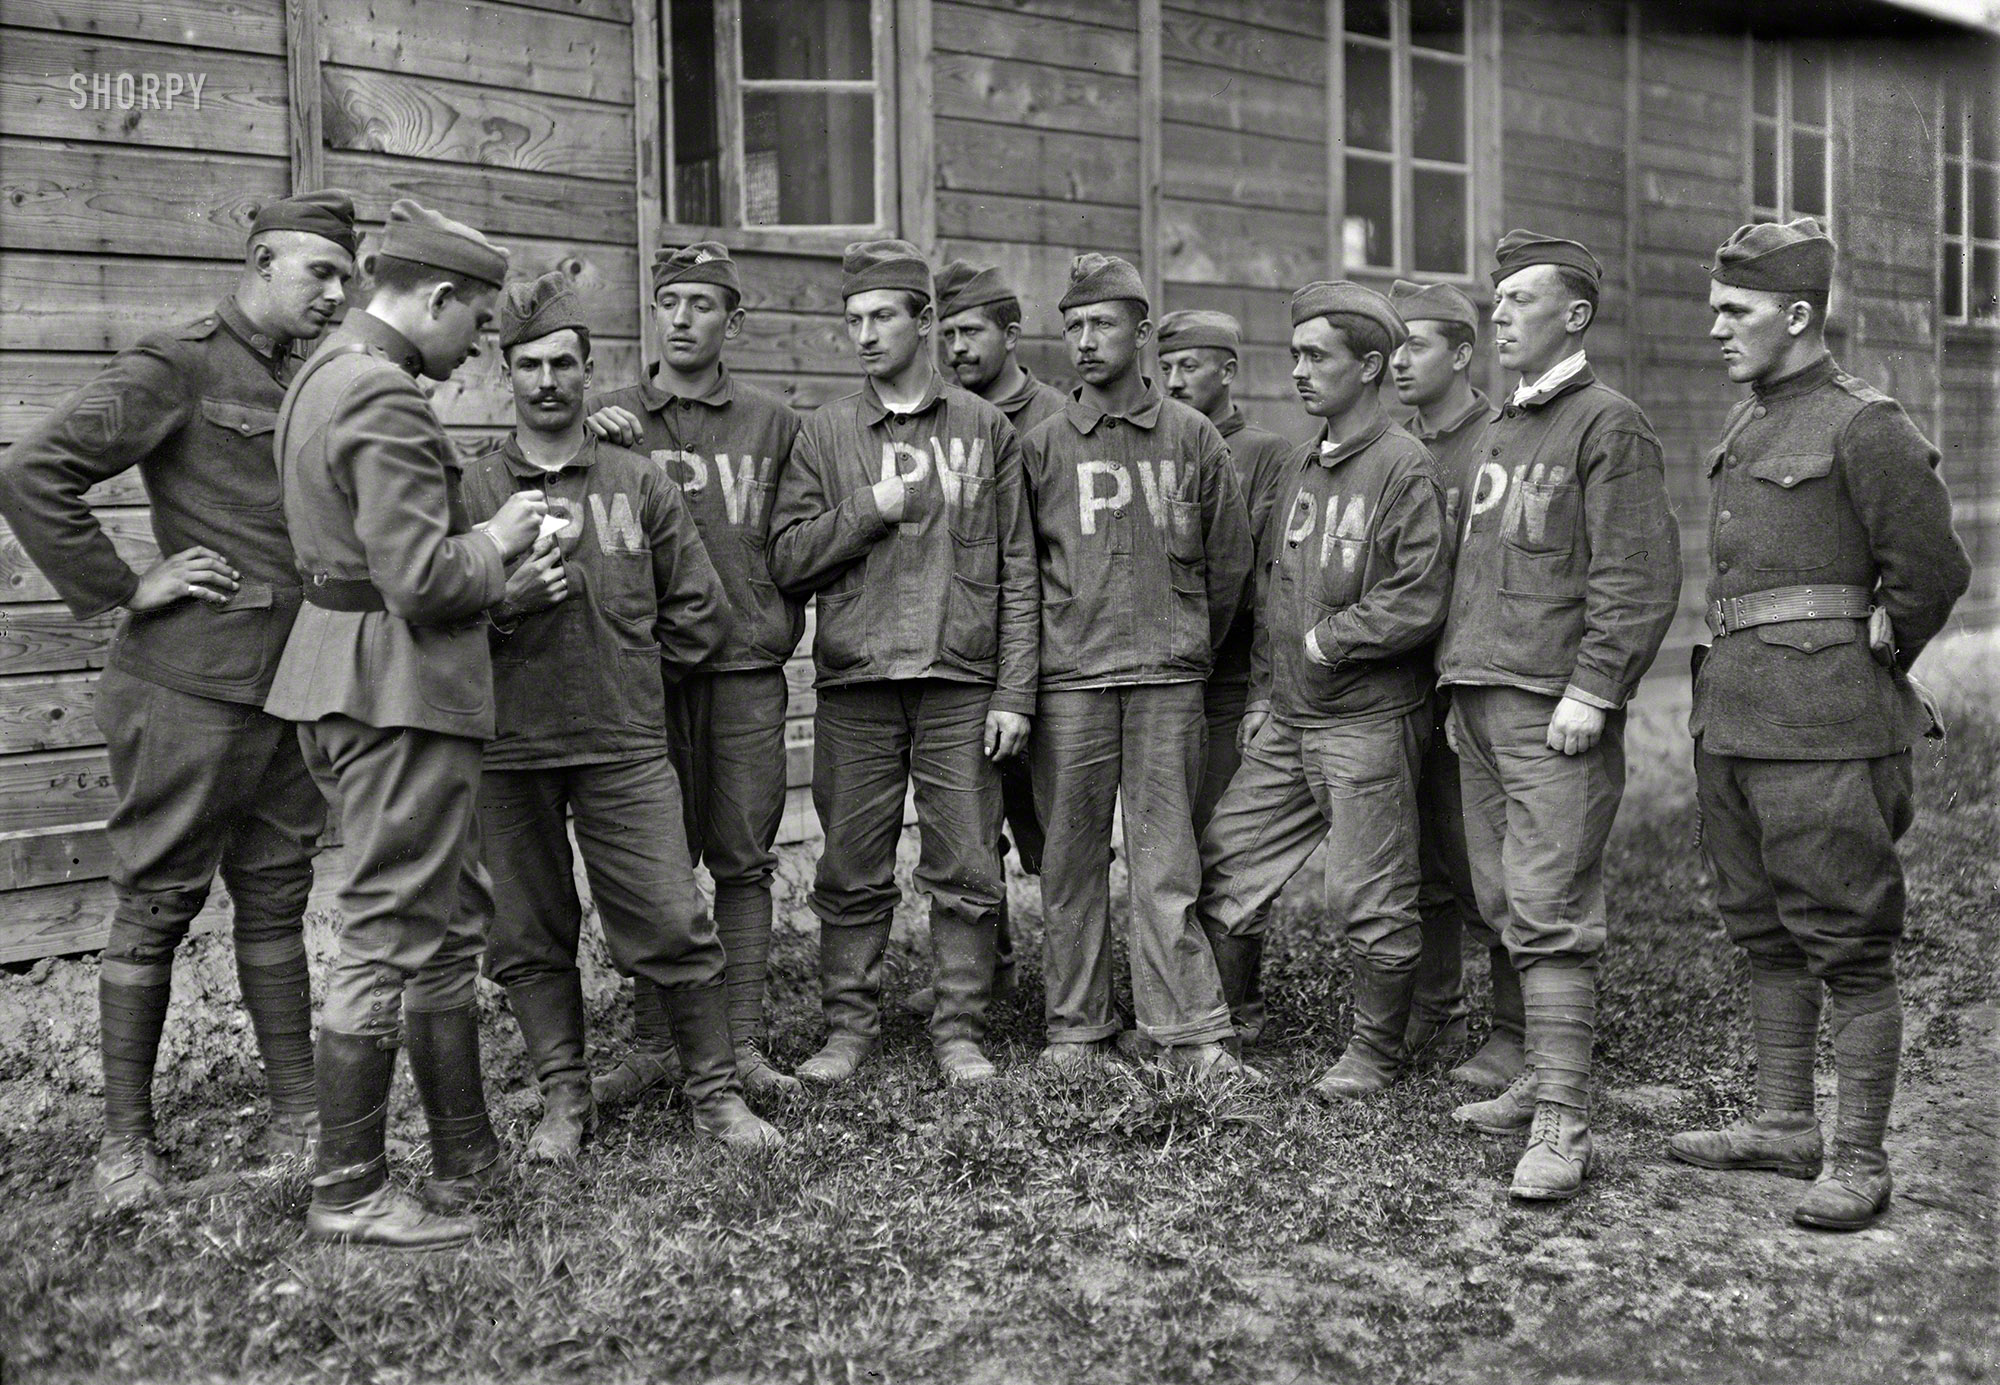 October 30, 1918. "Base Hospital No. 7 at Tours, France. American Red Cross Chaplain the Rev. F.M. Eliot taking the home addresses of interned German prisoners, so that their families may be notified that they are well. They showed much appreciation of favors." 5x7 glass negative by Lewis Hine. View full size.